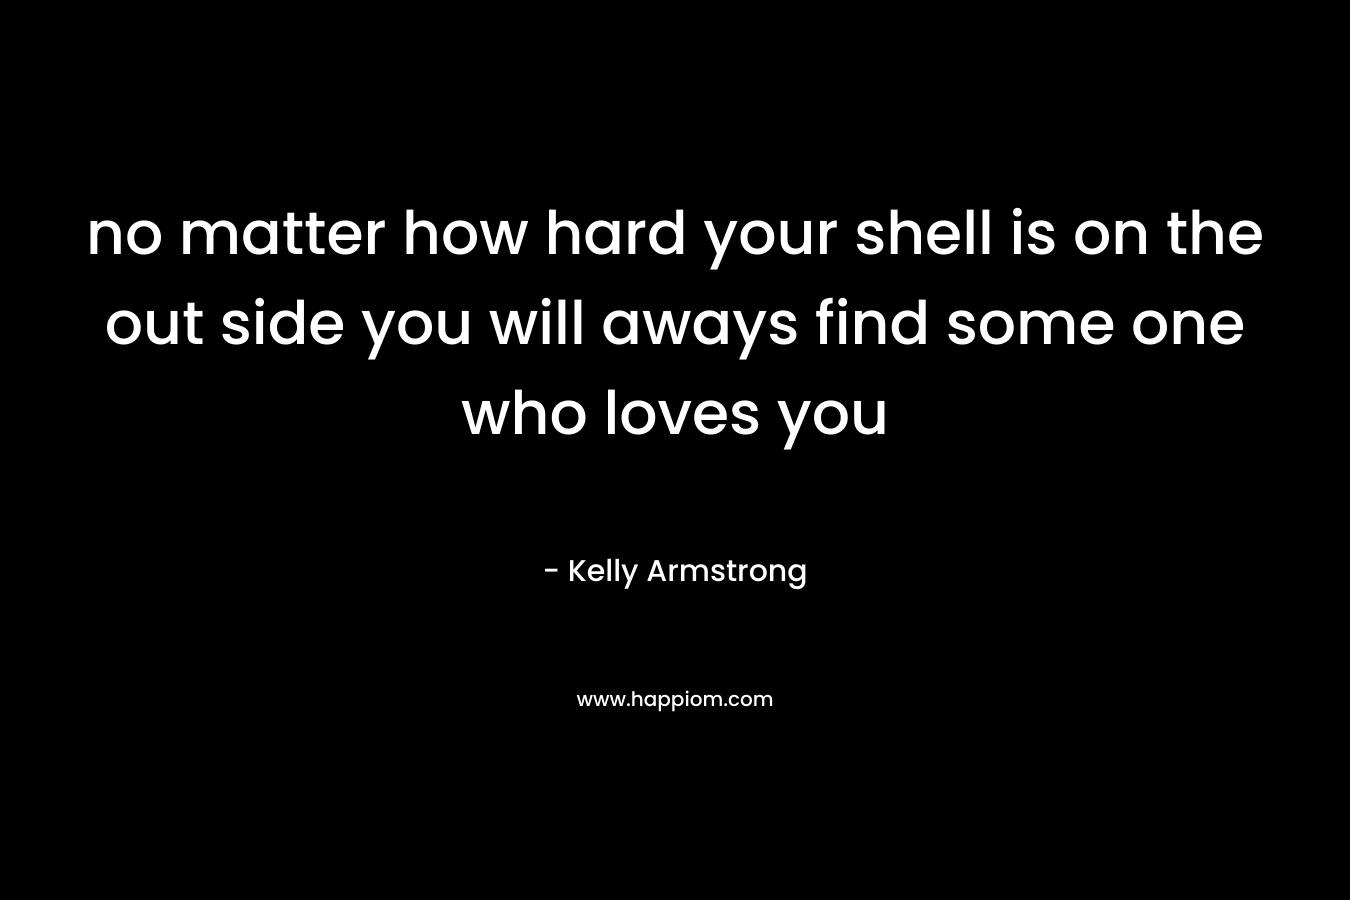 no matter how hard your shell is on the out side you will aways find some one who loves you